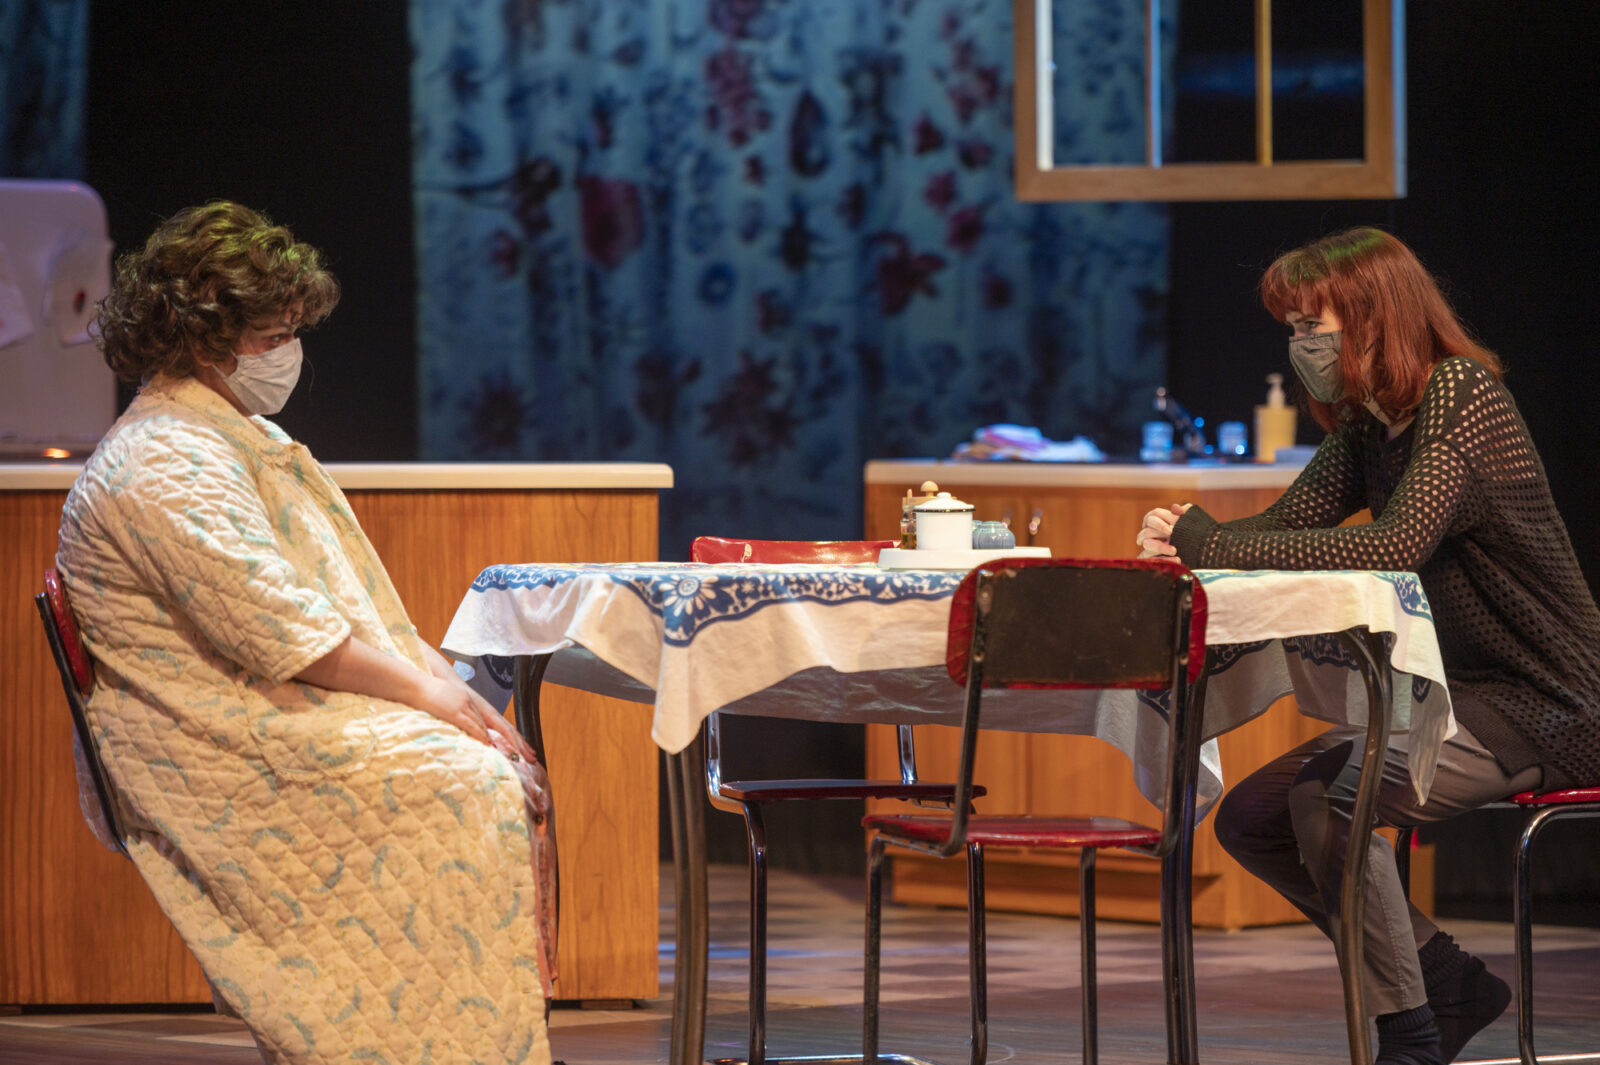 two people sit at a table on stage